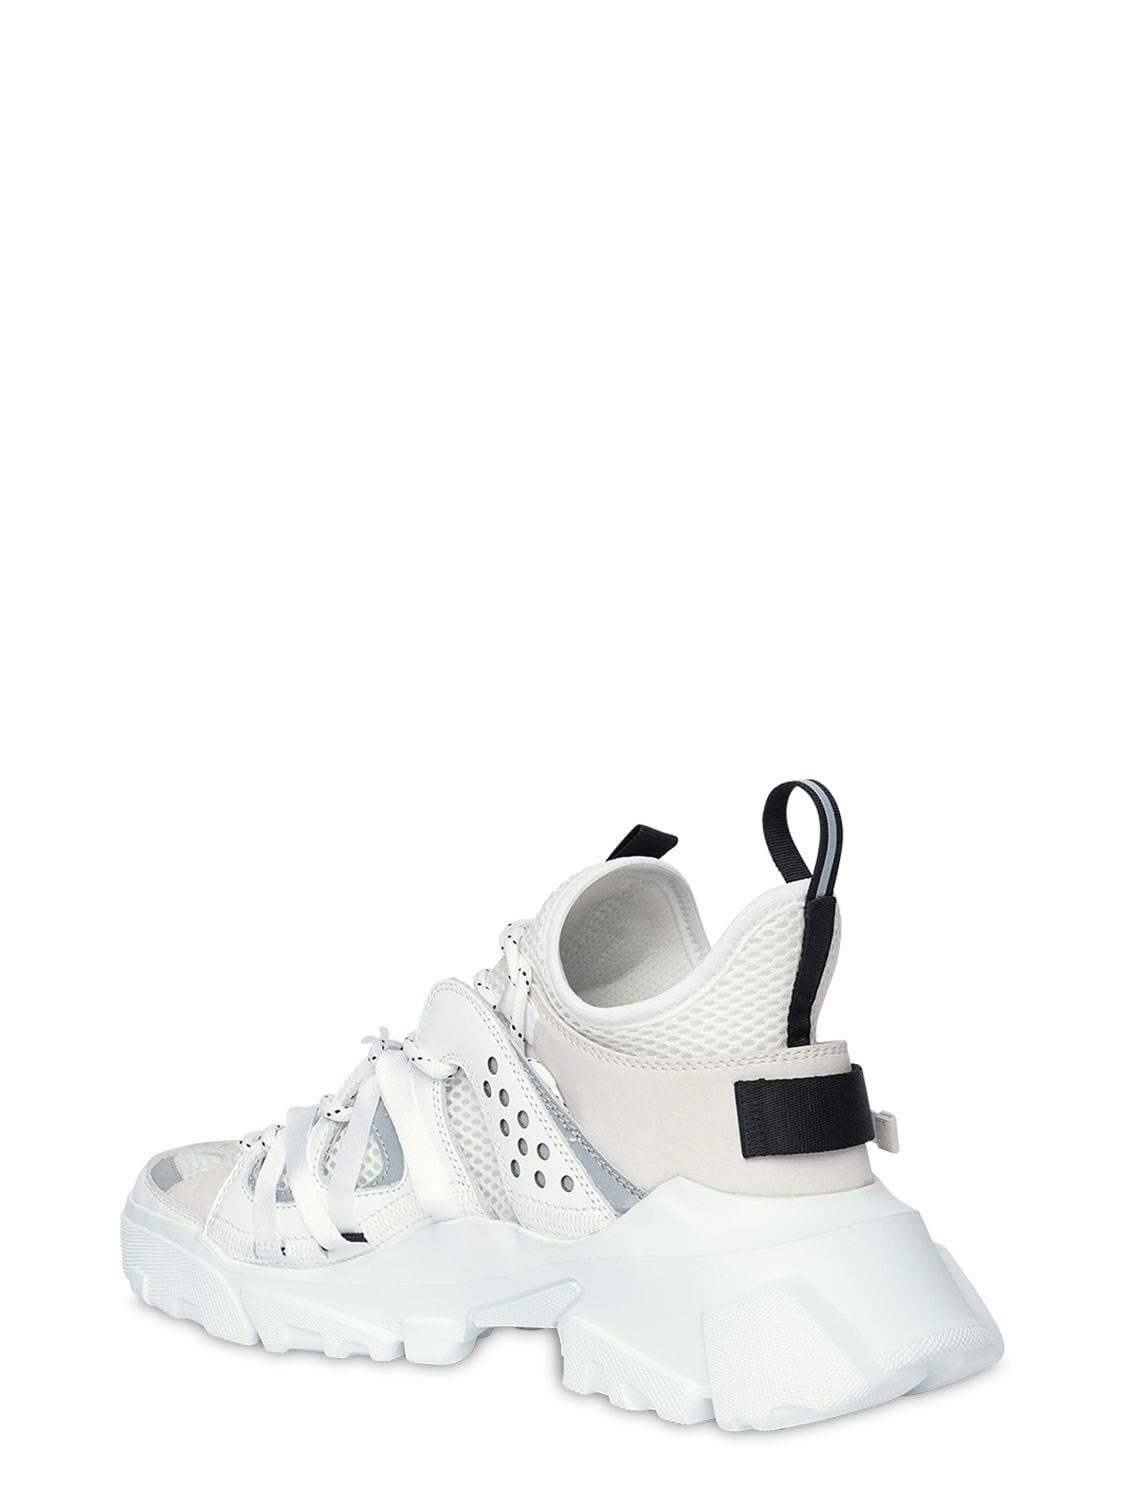 Descender Leather & Fabric Sneakers